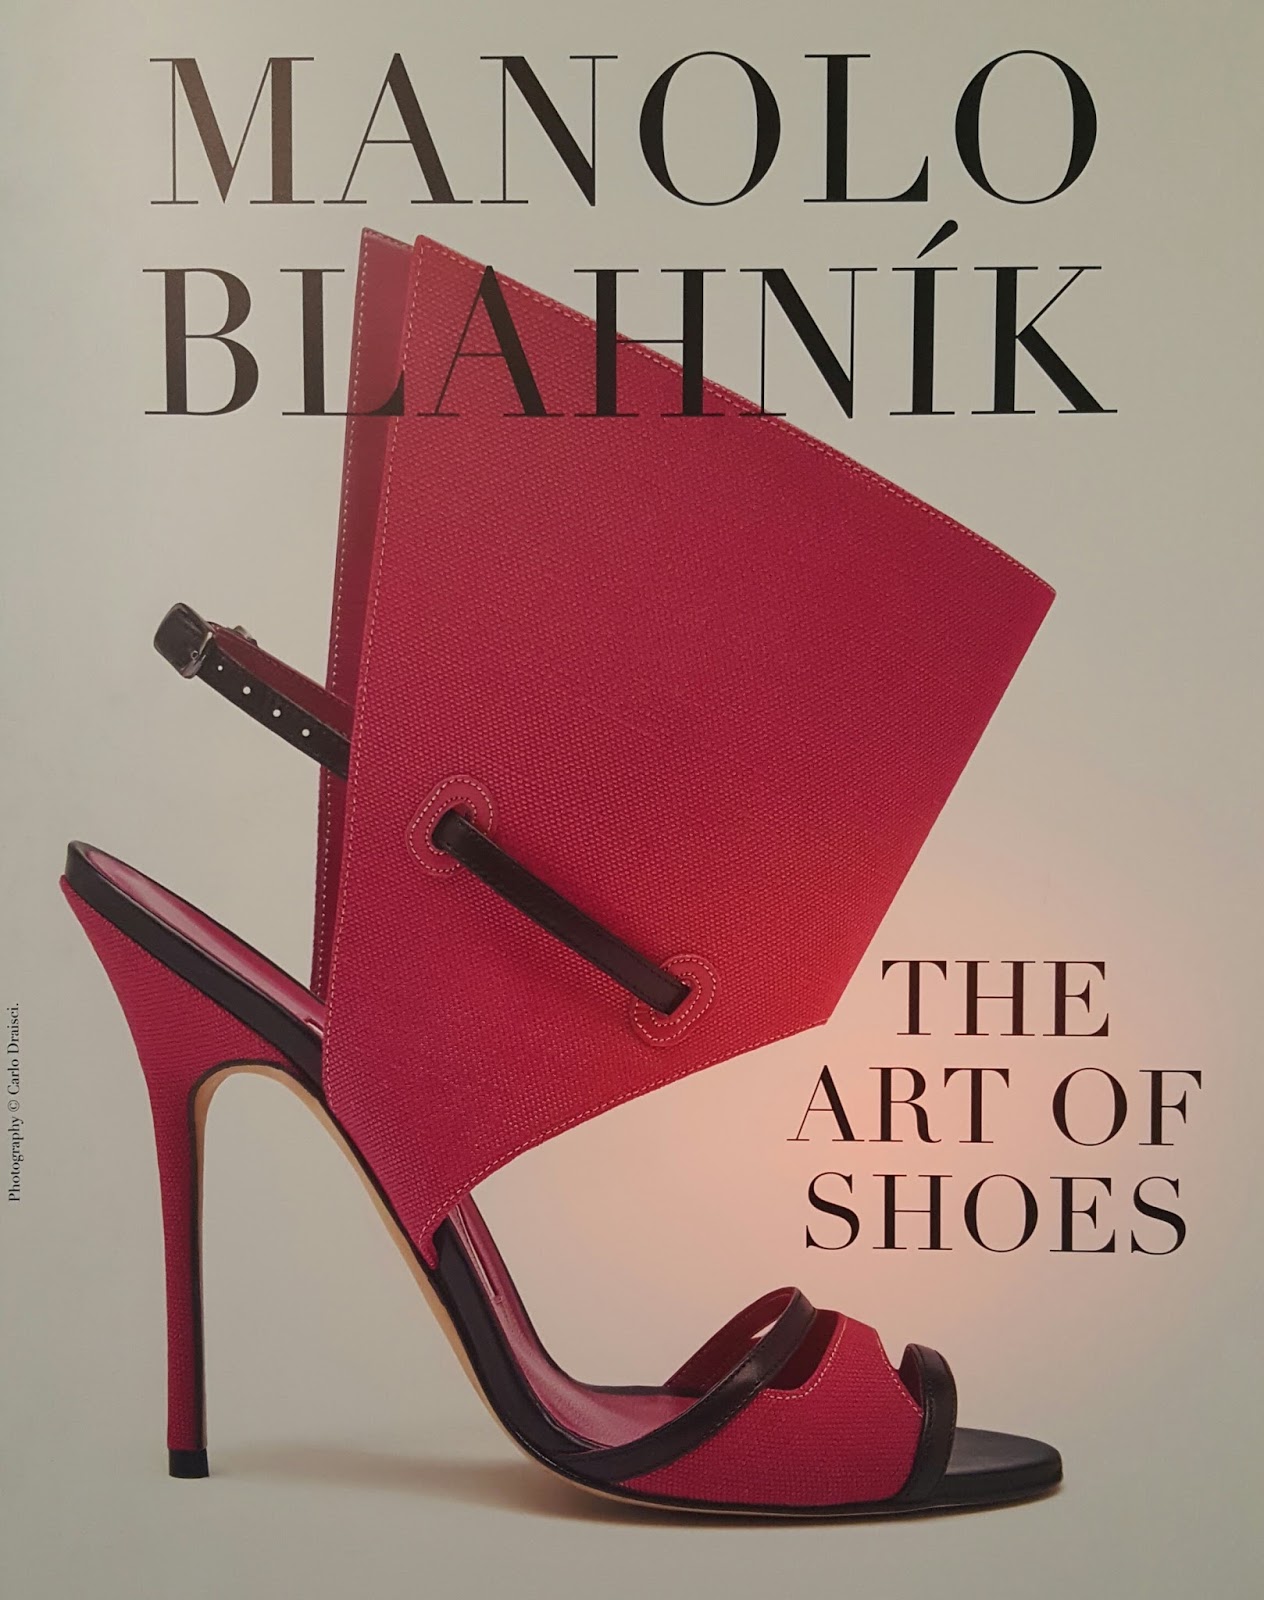 MANOLO BLAHNÍK THE ART OF SHOES | An Exhibition at Palazzo Morando ...